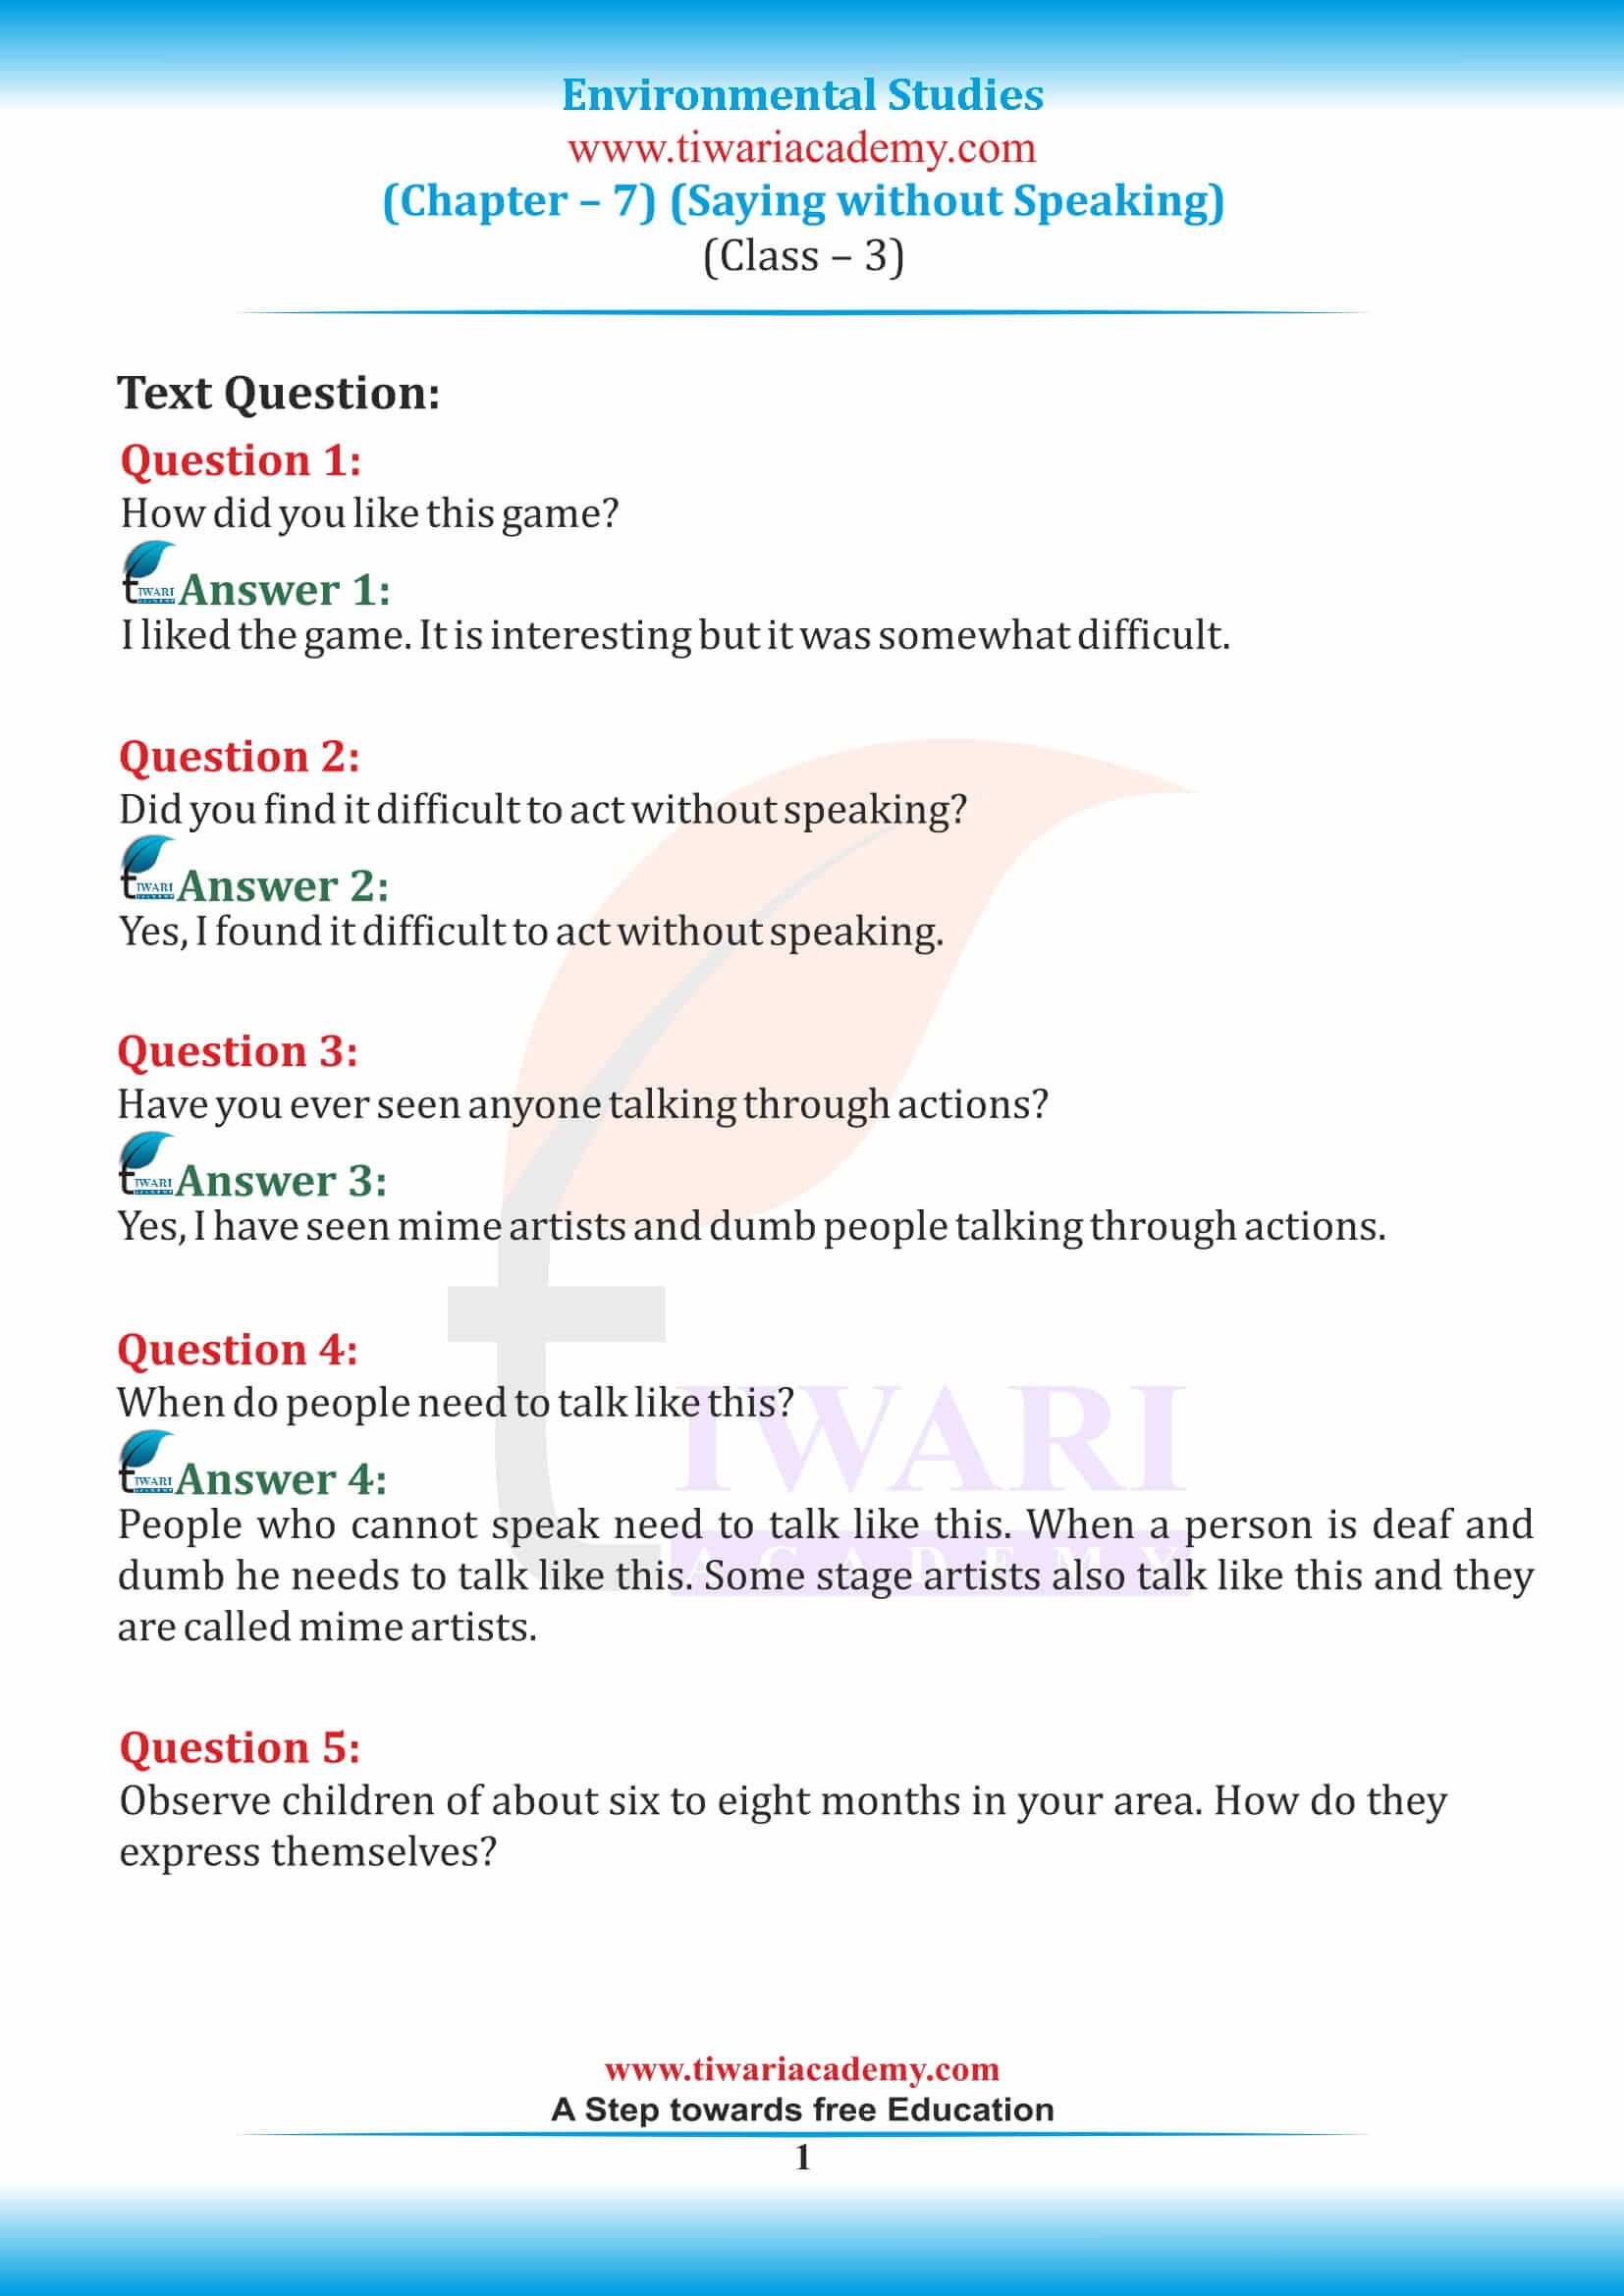 NCERT Solutions for Class 3 EVS Chapter 7 Saying Without Speaking